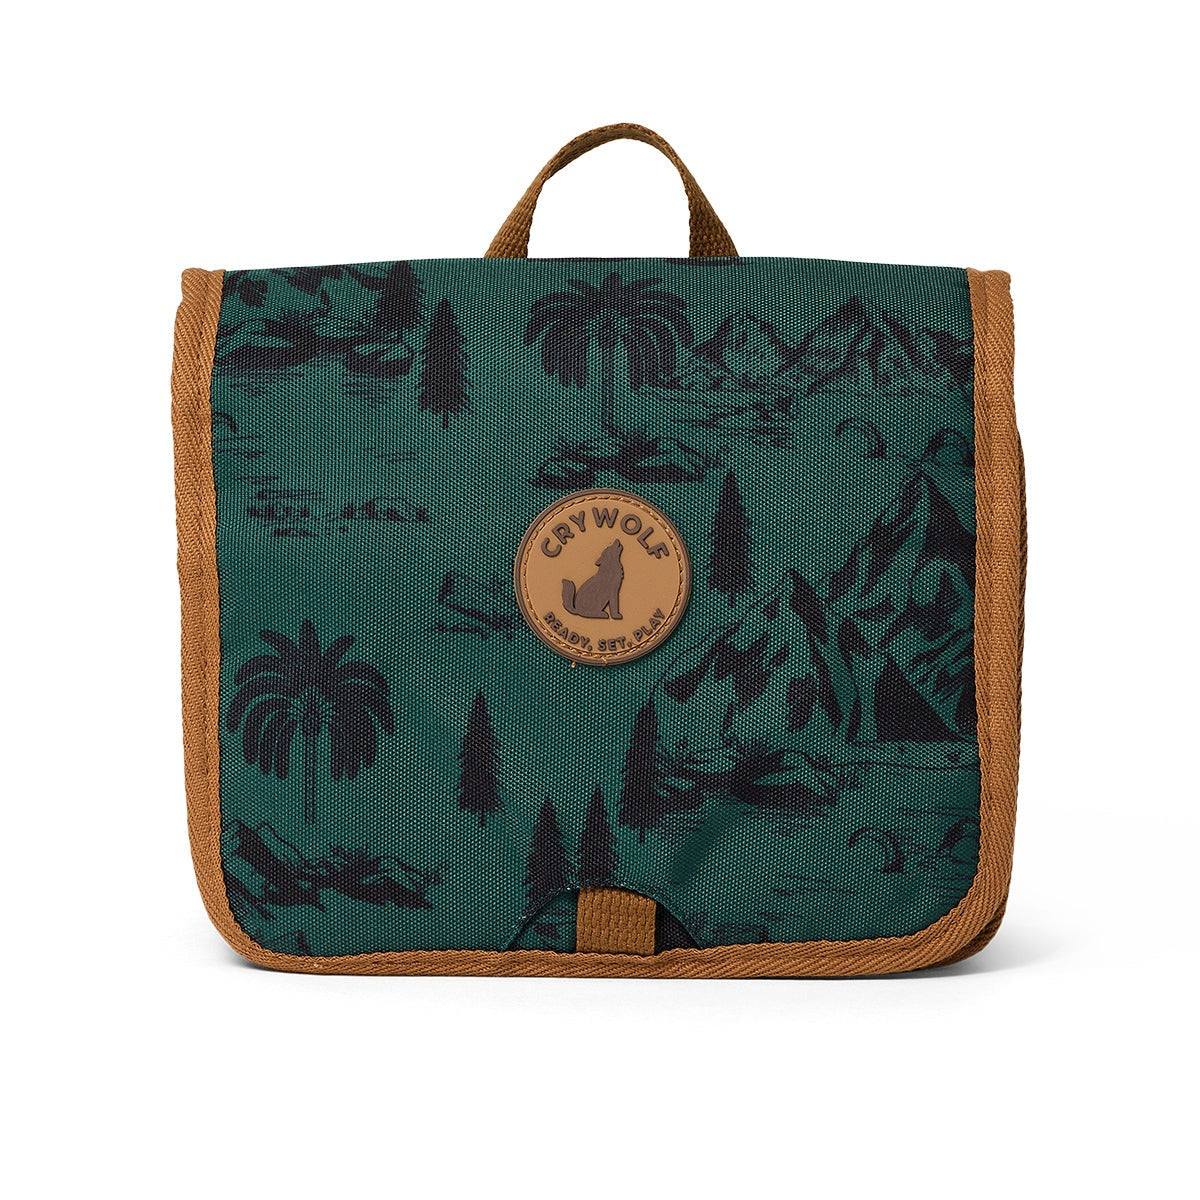 Crywolf Cosmetic Bag - Forest Landscape